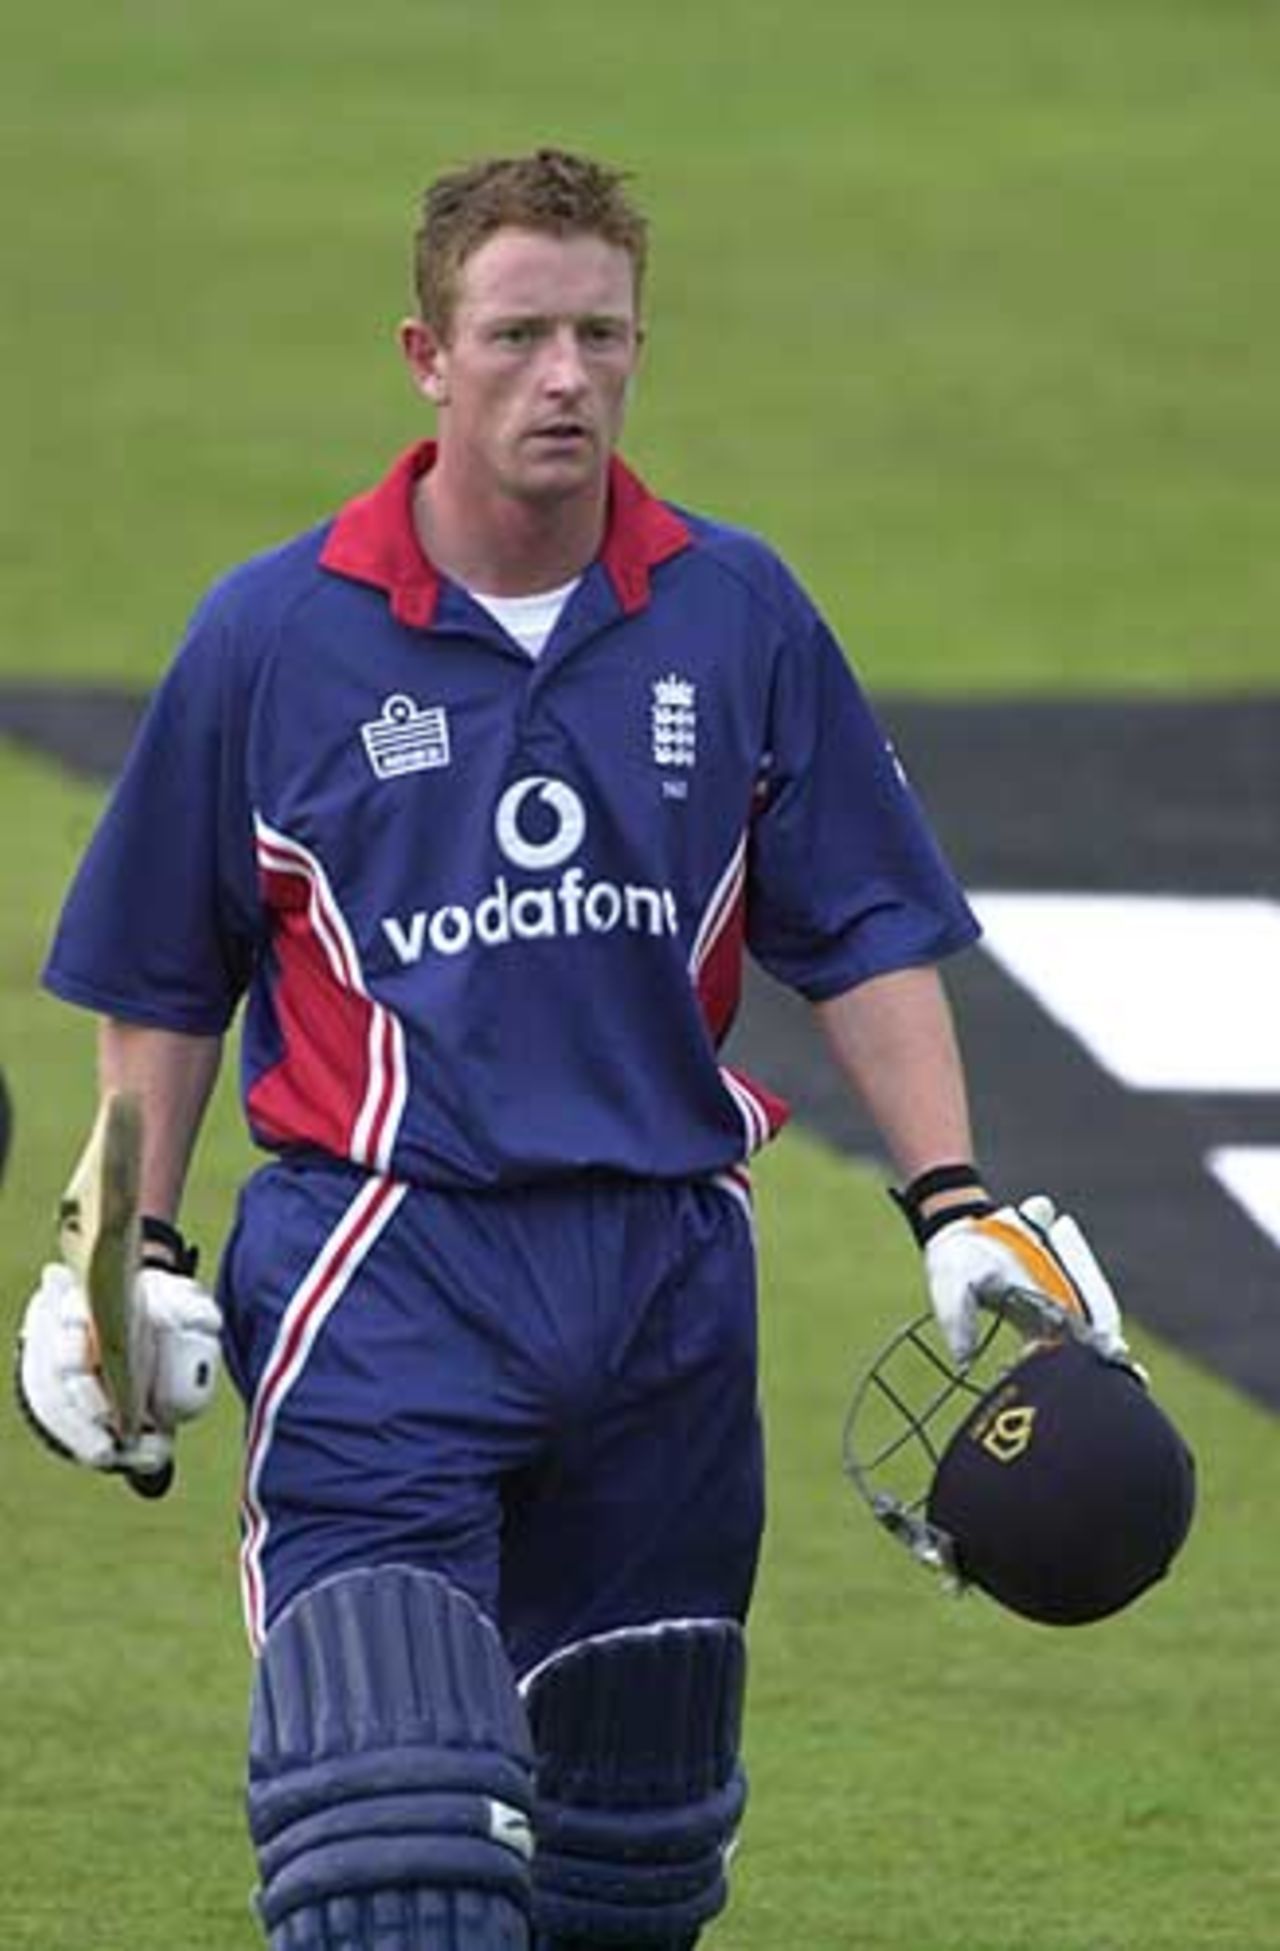 Paul Collingwood leaves the field after his innings of 38  kept England going to victory, England v Sri Lanka at Leeds, July 2002